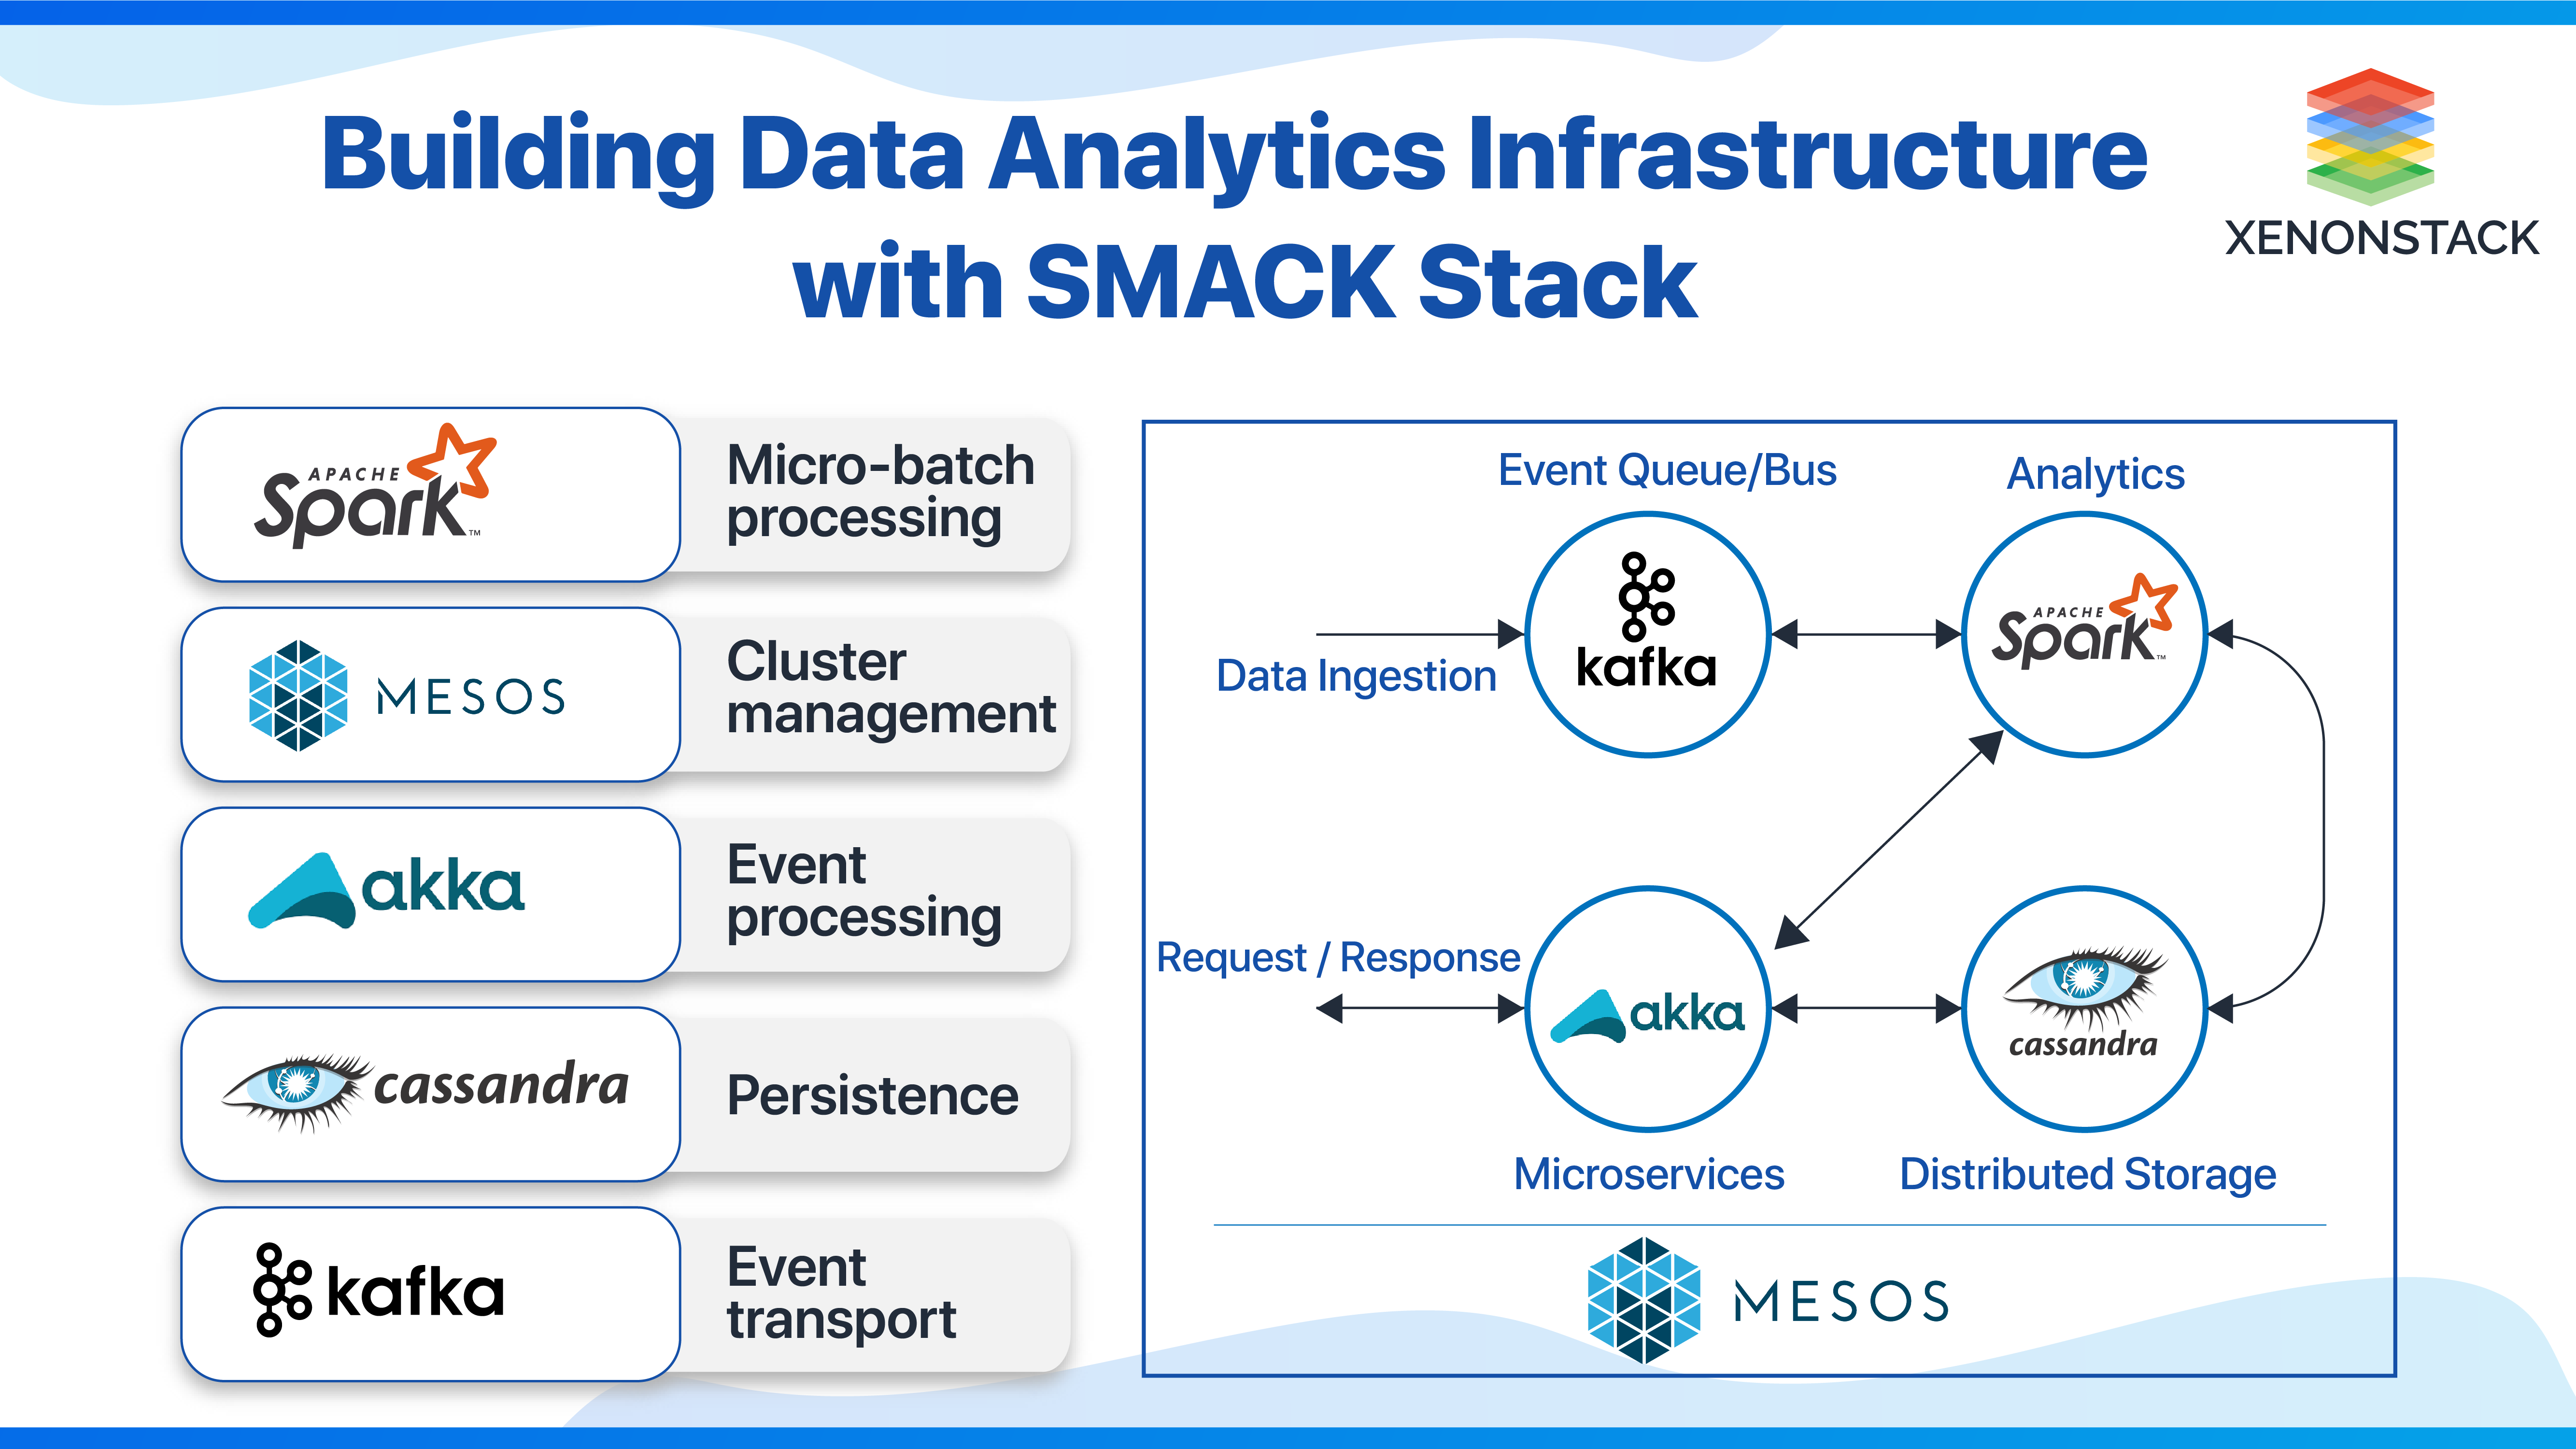 Data Analytics Infrastructure using SMACK Stack | A Case Study